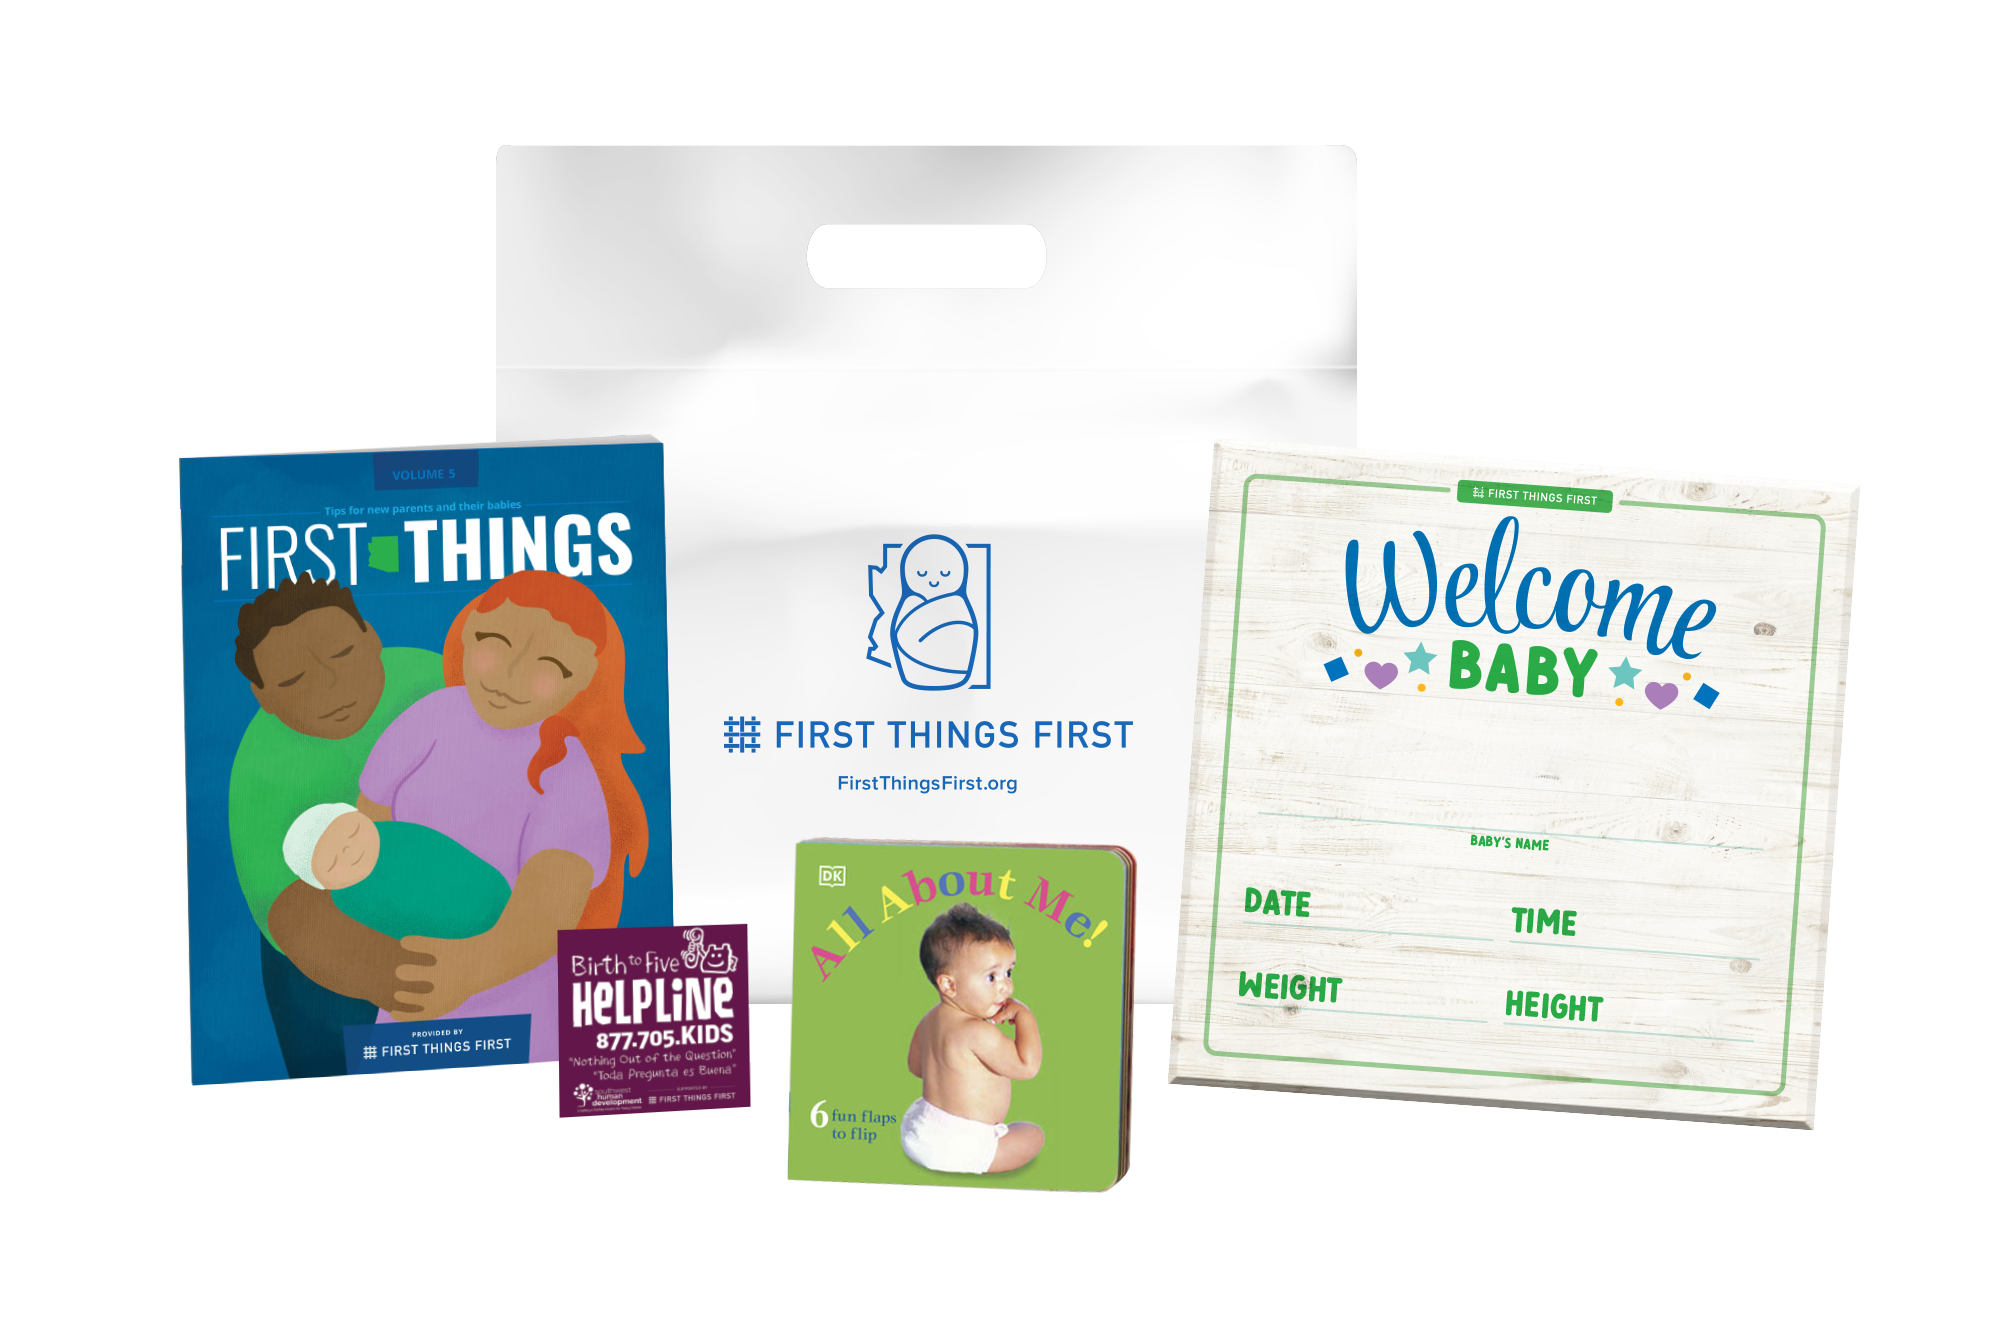 Parent Resources - First Things First